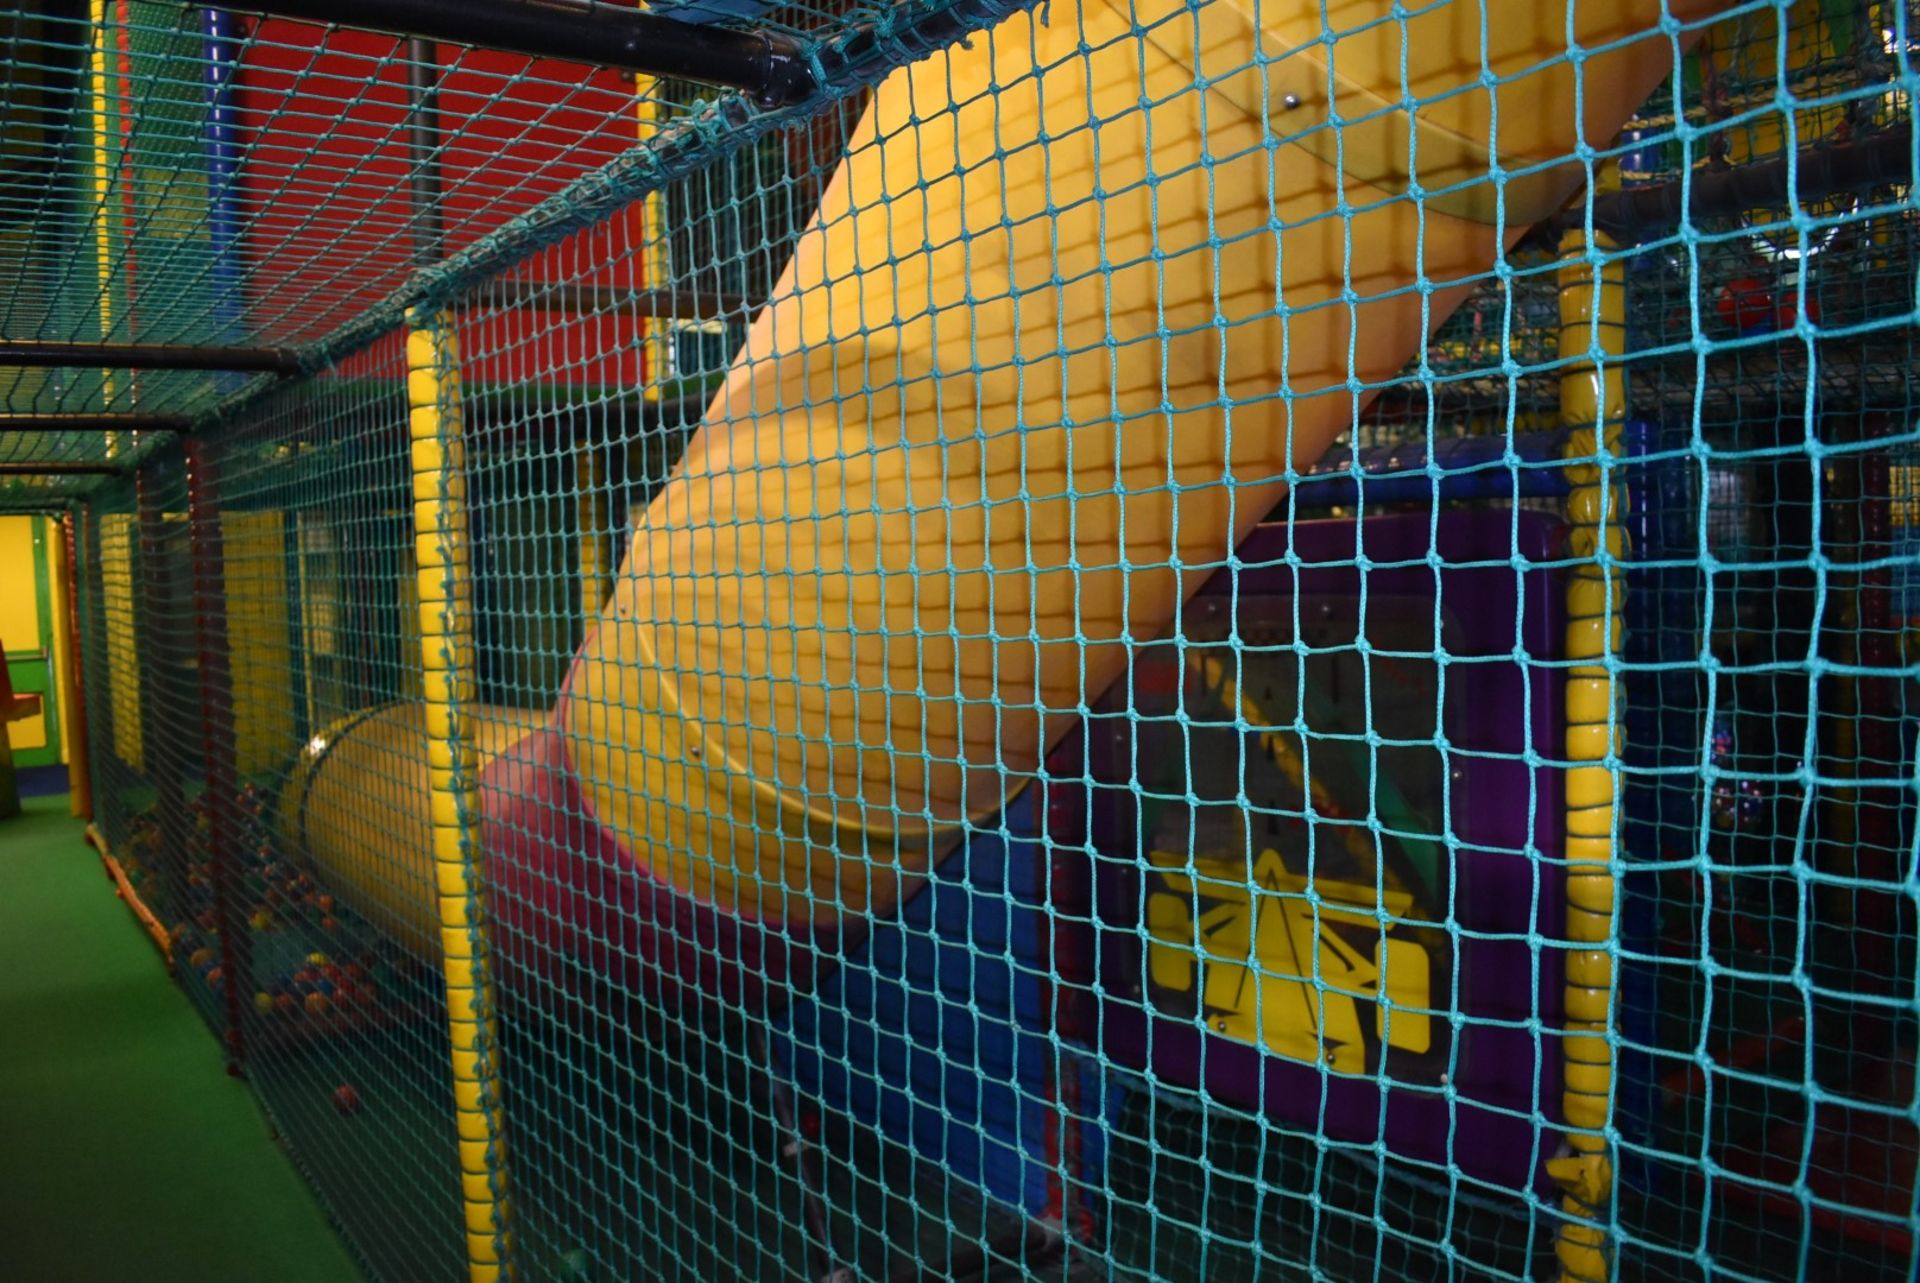 Bramleys Big Adventure Playground - Giant Action-Packed Playcentre With Slides, Zip Line Swings, - Image 9 of 128